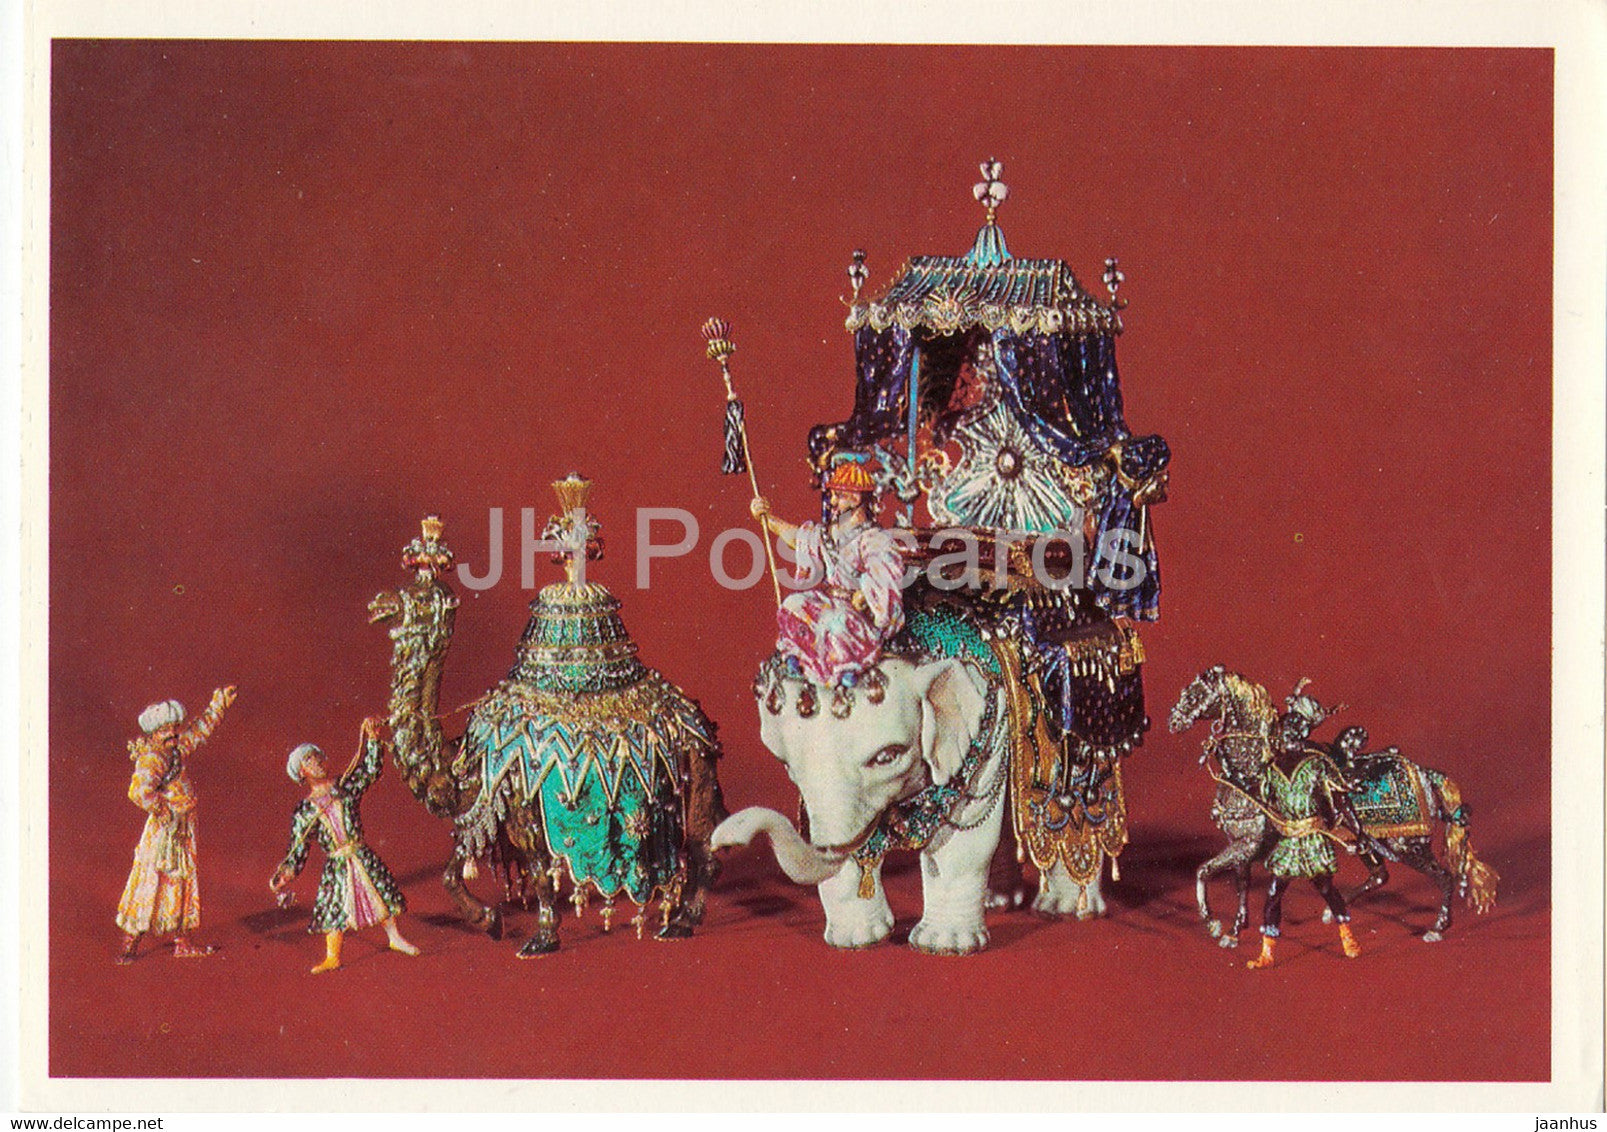 Gruppe aus dem Hofstaat des Grossmoguls - Group from the Court of Great Mogul - elephant - art - Germany - unused - JH Postcards